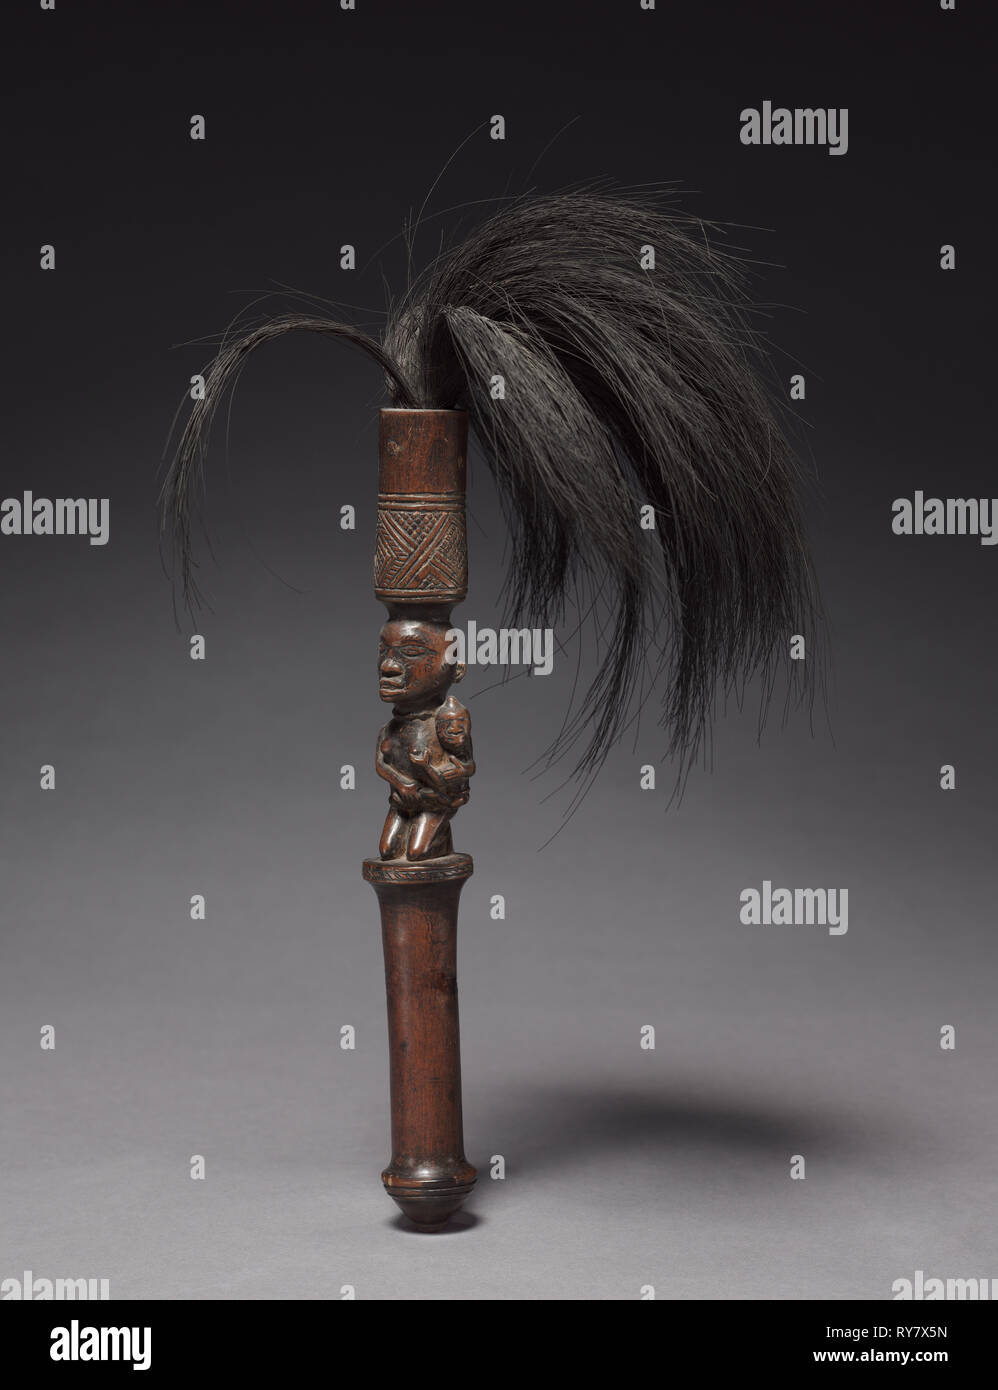 Flywhisk, late 1800s-early 1900s. Central Africa, Democratic Republic of the Congo (most likely), Cabinda, or Republic of the Congo,  probably Yombe people. Wood, animal hair; overall: 30 x 16 x 18 cm (11 13/16 x 6 5/16 x 7 1/16 in Stock Photo